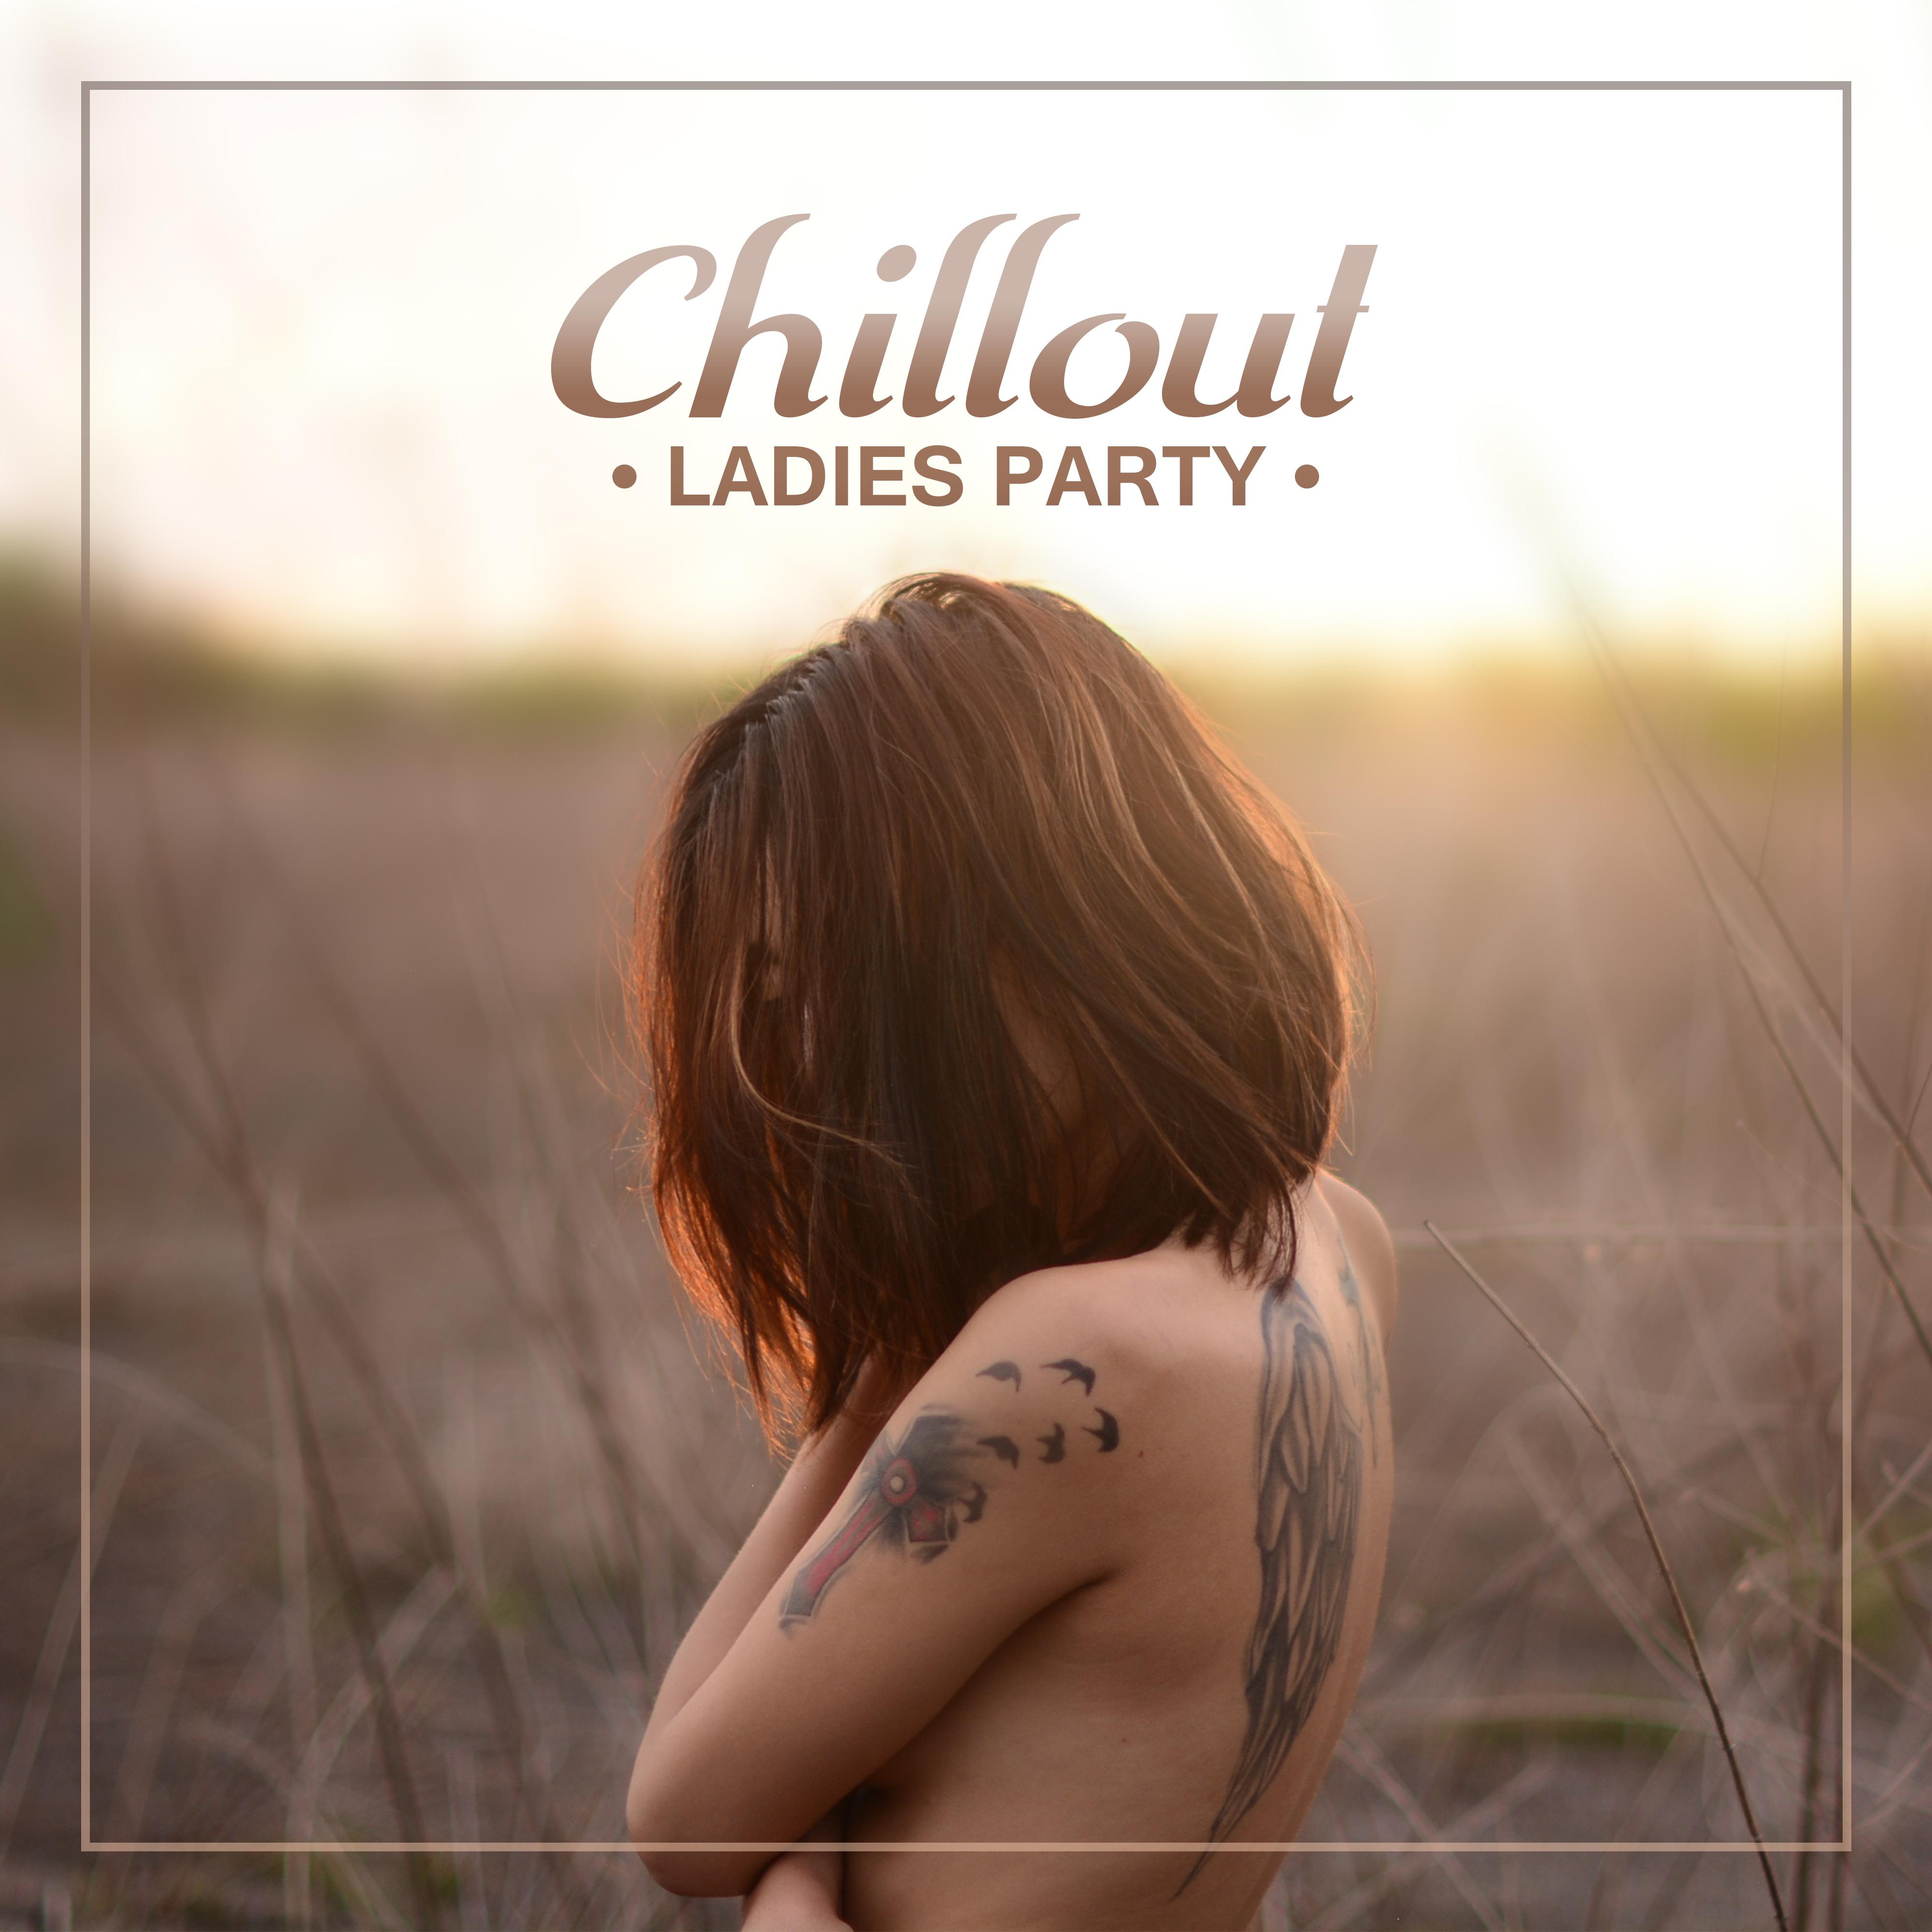 Chillout Ladies Party – Party Lounge, Chill Out Music, Summer 2017, Relaxed Beats